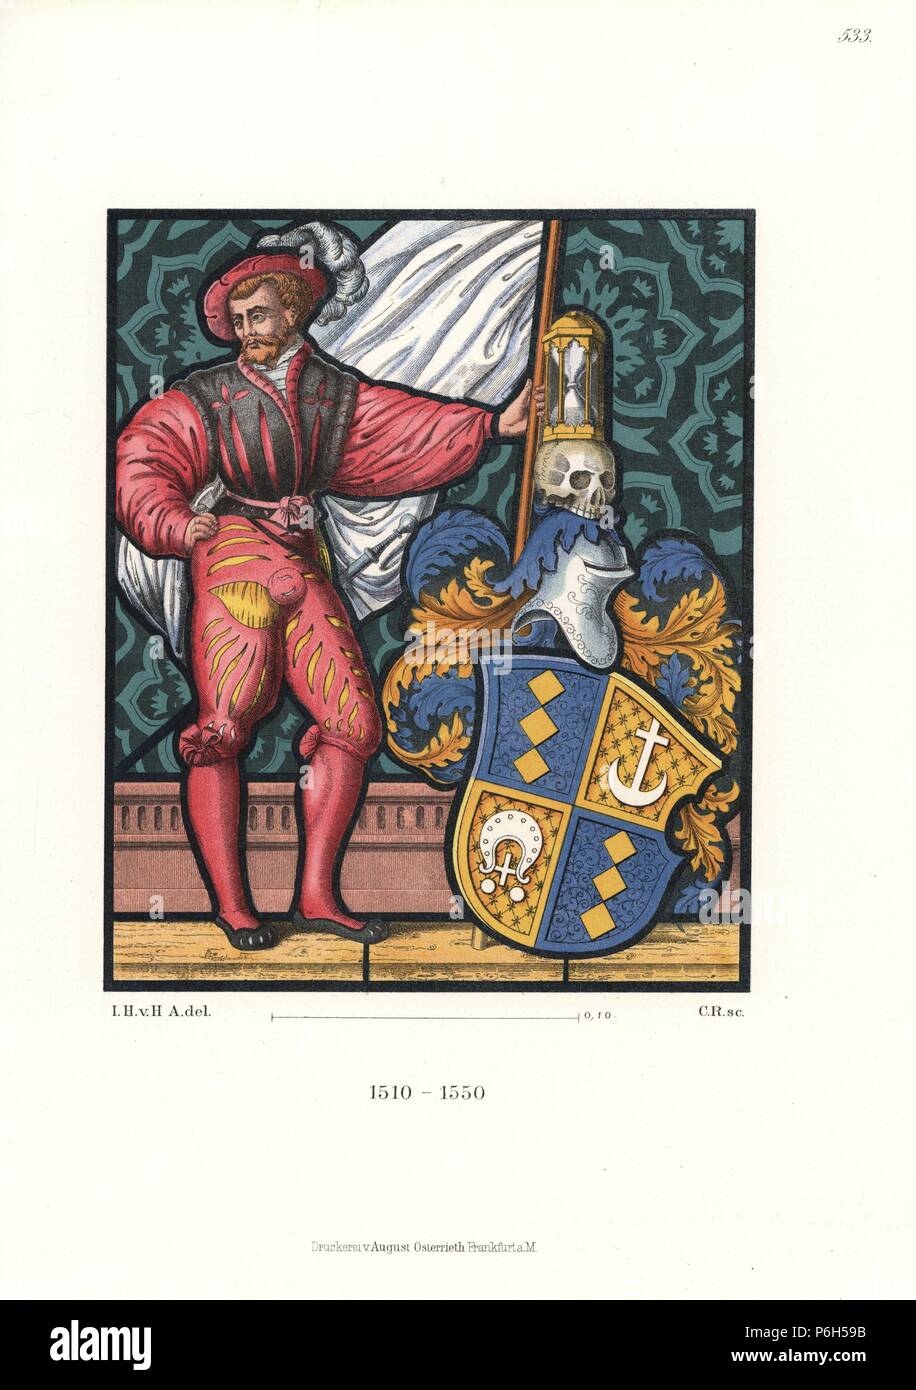 Swiss costume of a knight, Alixander Paner of Shaffhausen, with heraldic shield, helmet, hourglass and skull, 1510-1550. He wears quilted and slashed doublet and breeches, codpiece and garters. From a stained glass portrait in Nilkheim bei Aschaffenburg. Chromolithograph from Hefner-Alteneck's 'Costumes, Artworks and Appliances from the Middle Ages to the 17th Century,' Frankfurt, 1889. Illustration by Dr. Jakob Heinrich von Hefner-Alteneck, lithographed by C. Regnier. Dr. Hefner-Alteneck (1811-1903) was a German museum curator, archaeologist, art historian, illustrator and etcher. Stock Photo